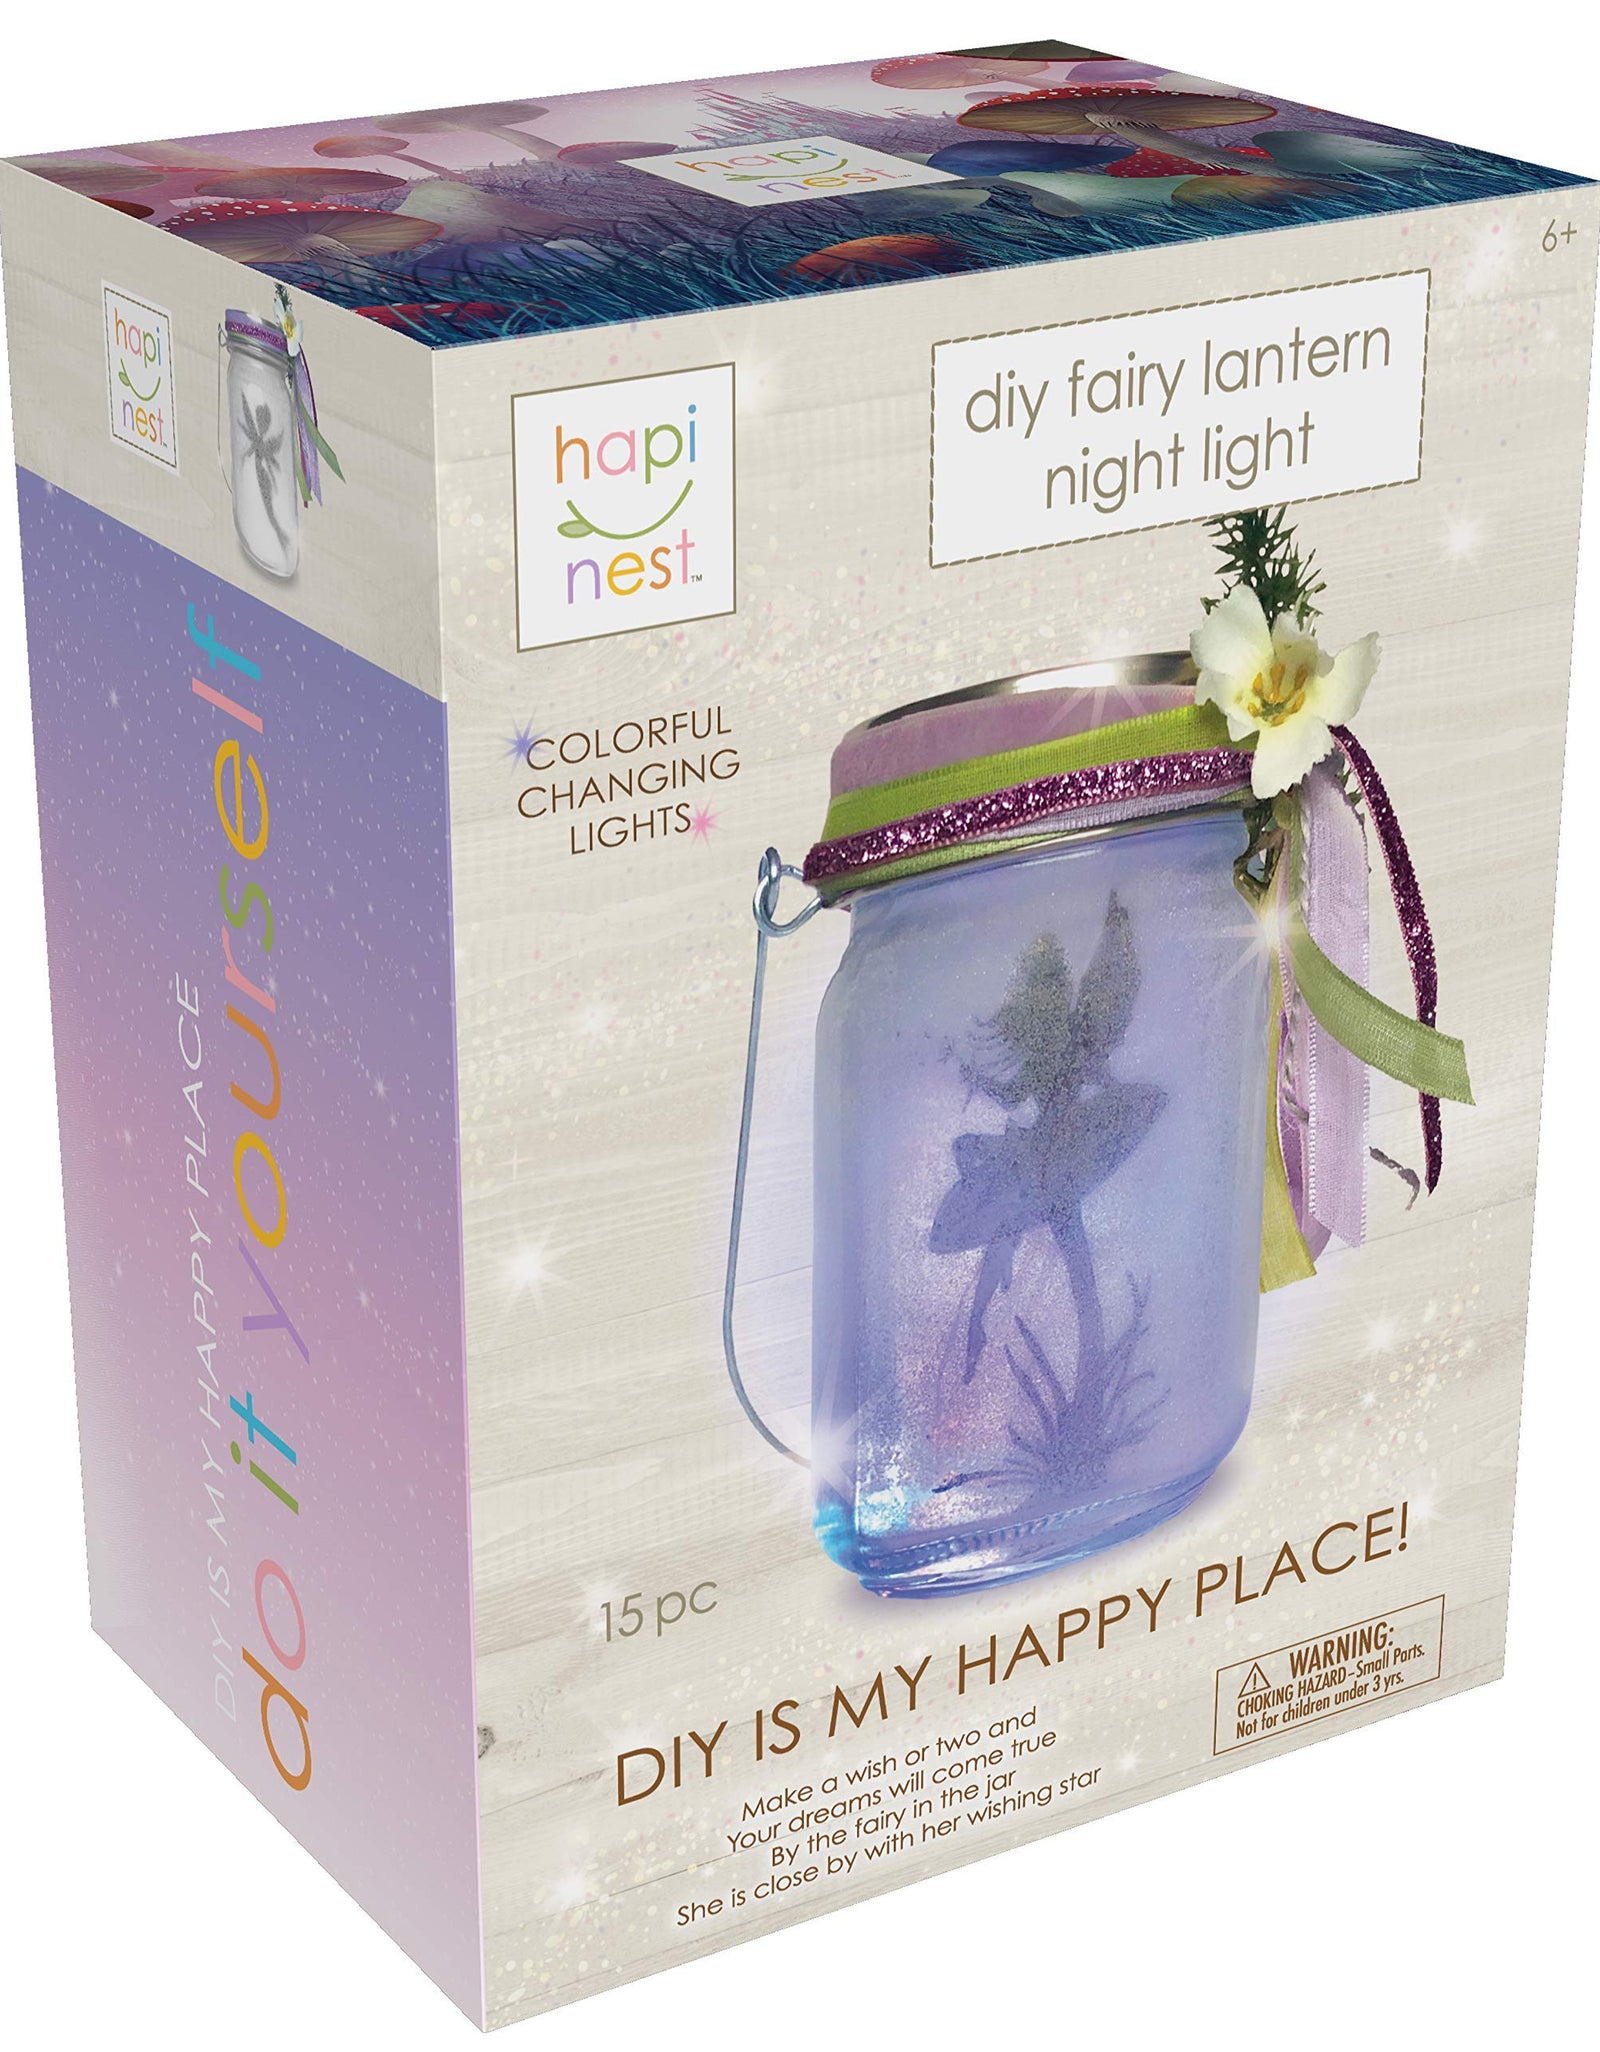 Hapinest DIY Fairy Lantern Night Light Kit - Arts and Crafts Gift for Girls Ages 6 7 8 9 10 Years and Up